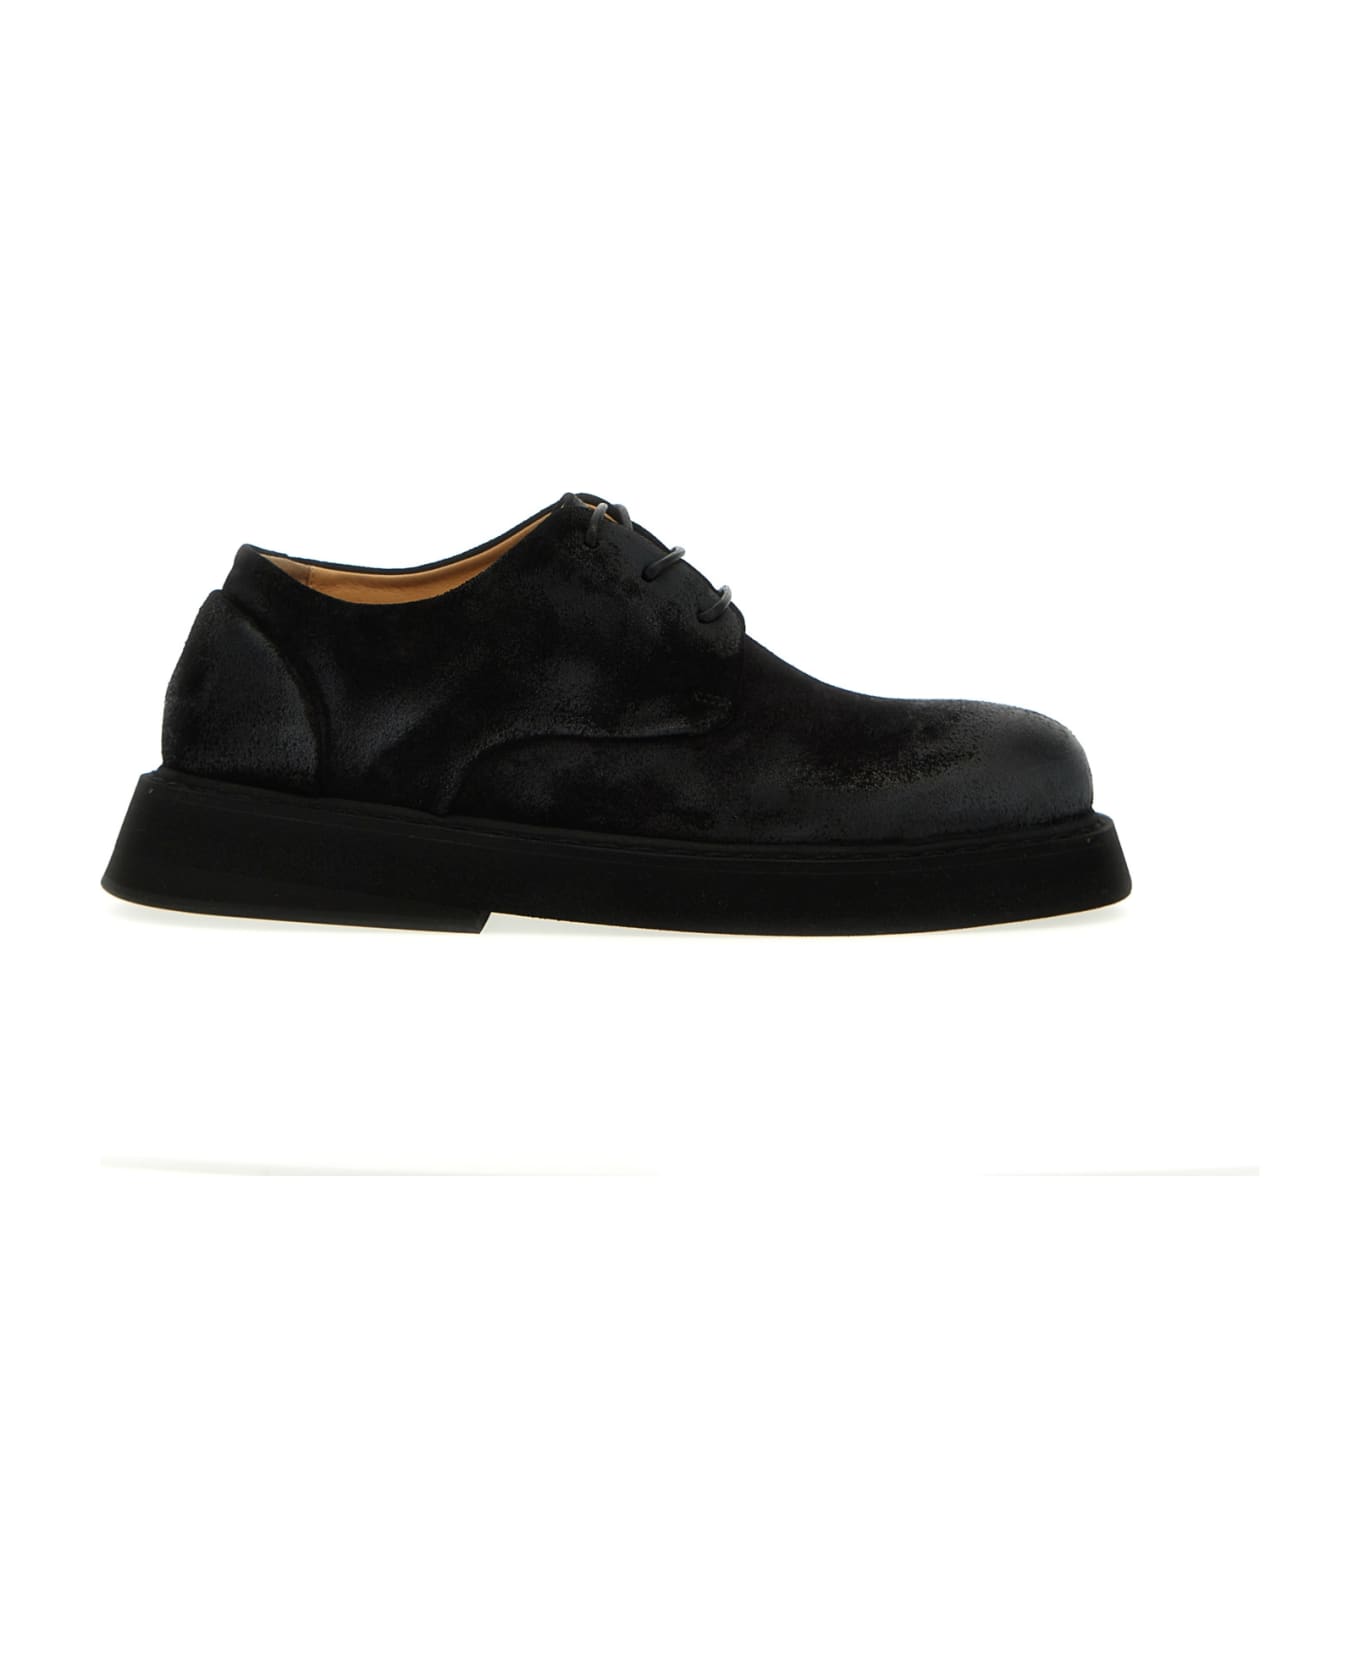 Marsell 'spalla' Lace Up Shoes - Black  